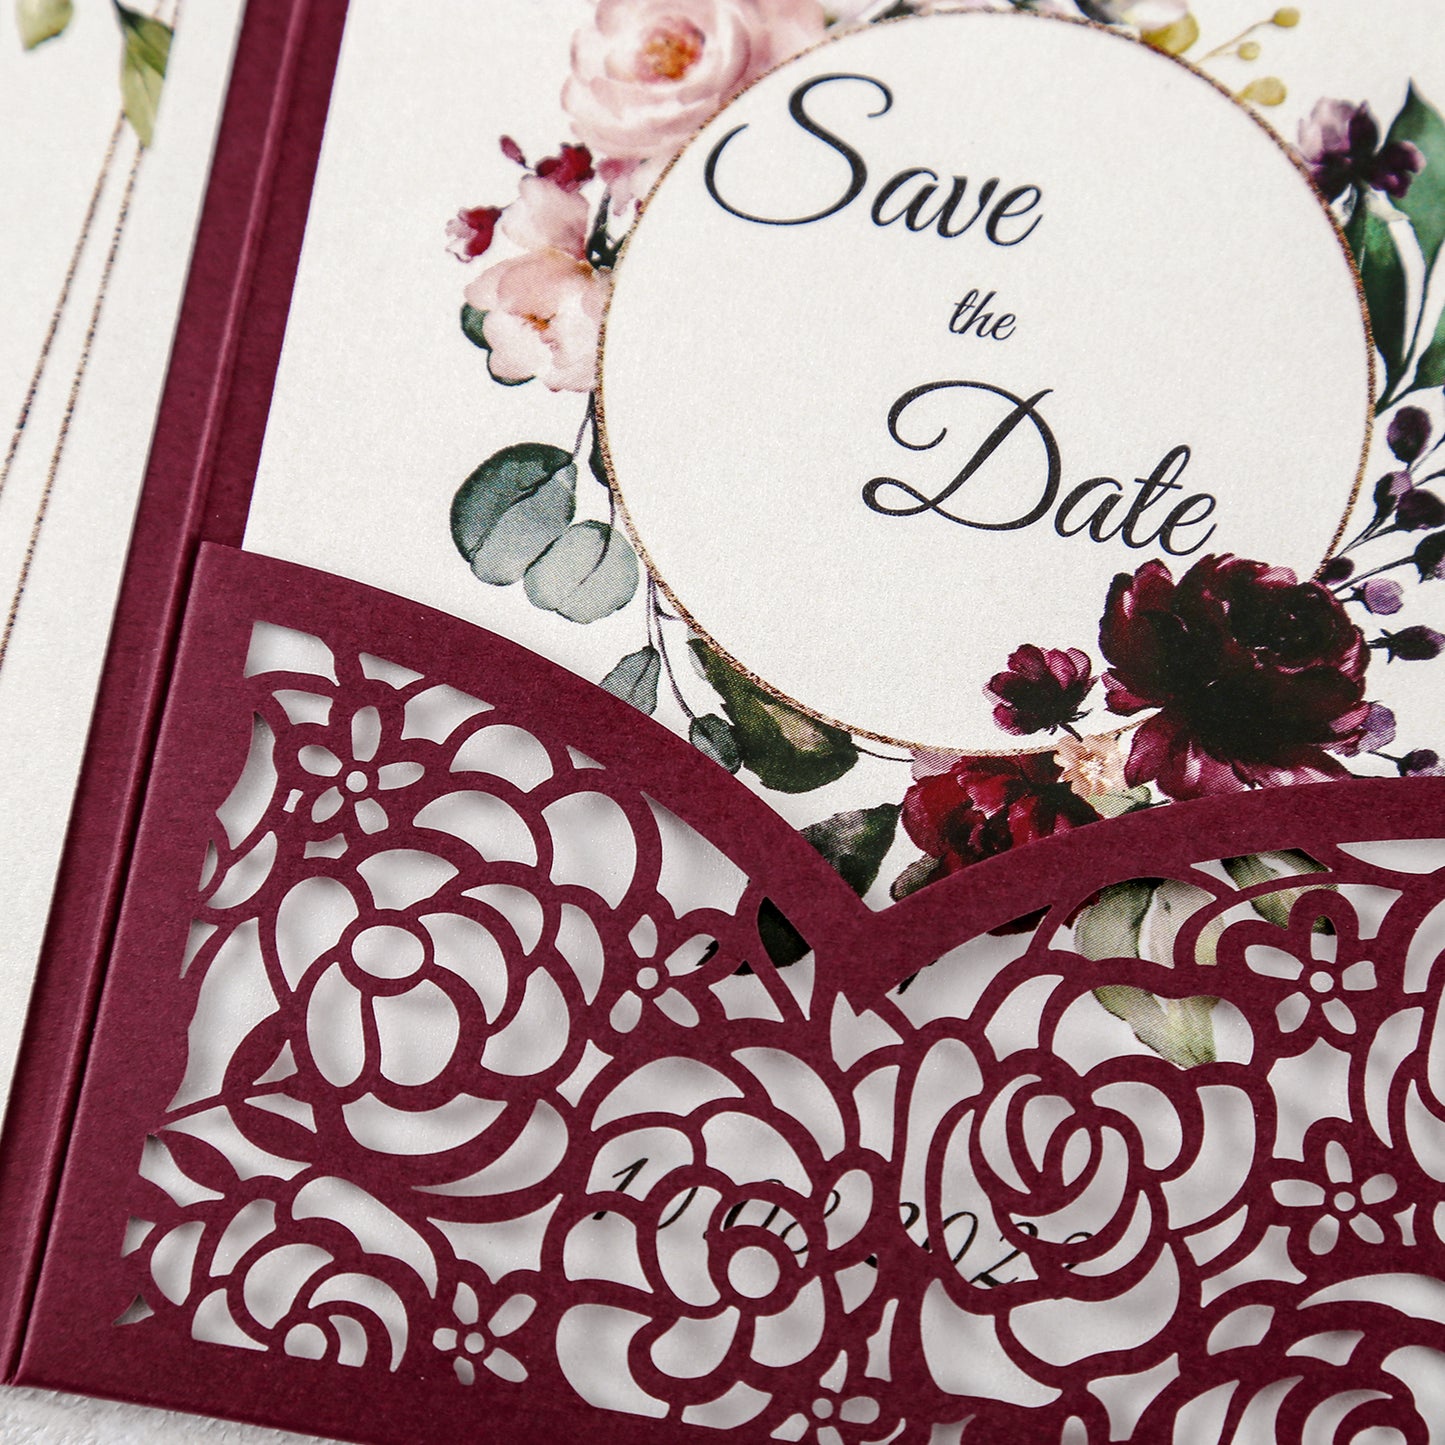 4.7 x7 inch Burgundy Laser Cut Hollow Rose Wedding Invitations Cards with Burgundy Pockets and Envelopes for Wedding Bridal Shower